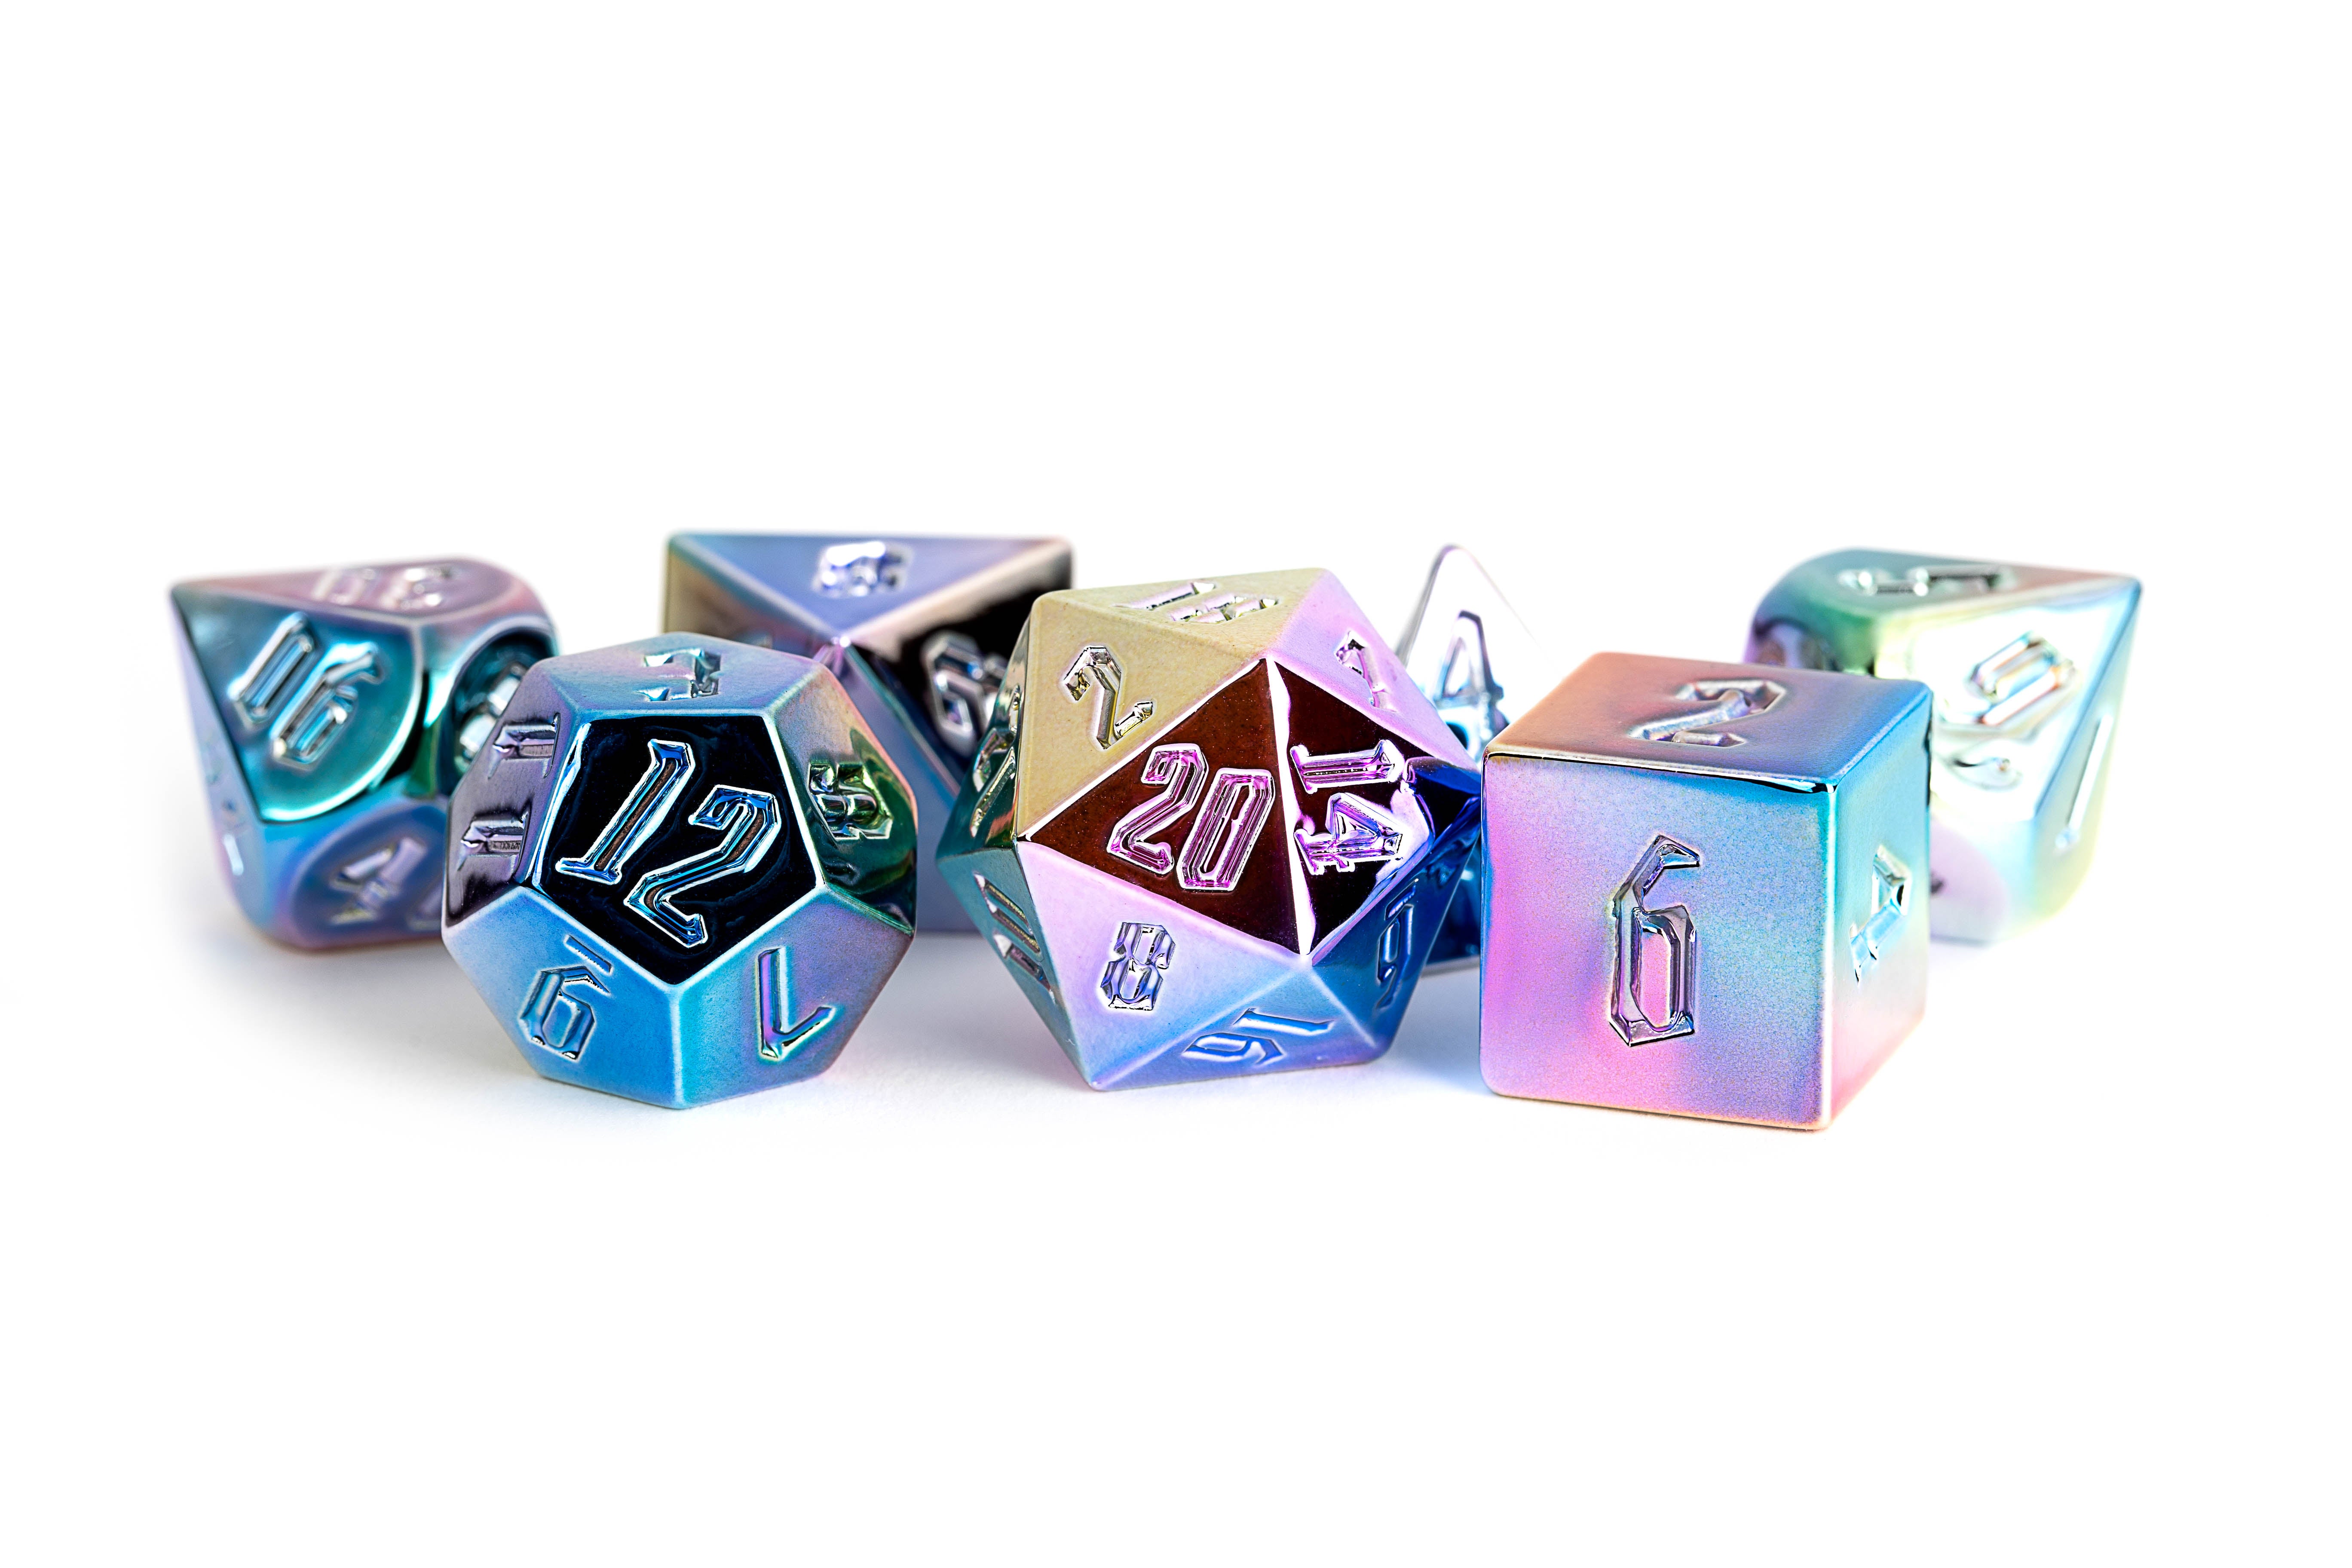 Metallic Dice Games Aluminum Plated 16mm Polyhedral Dice Set